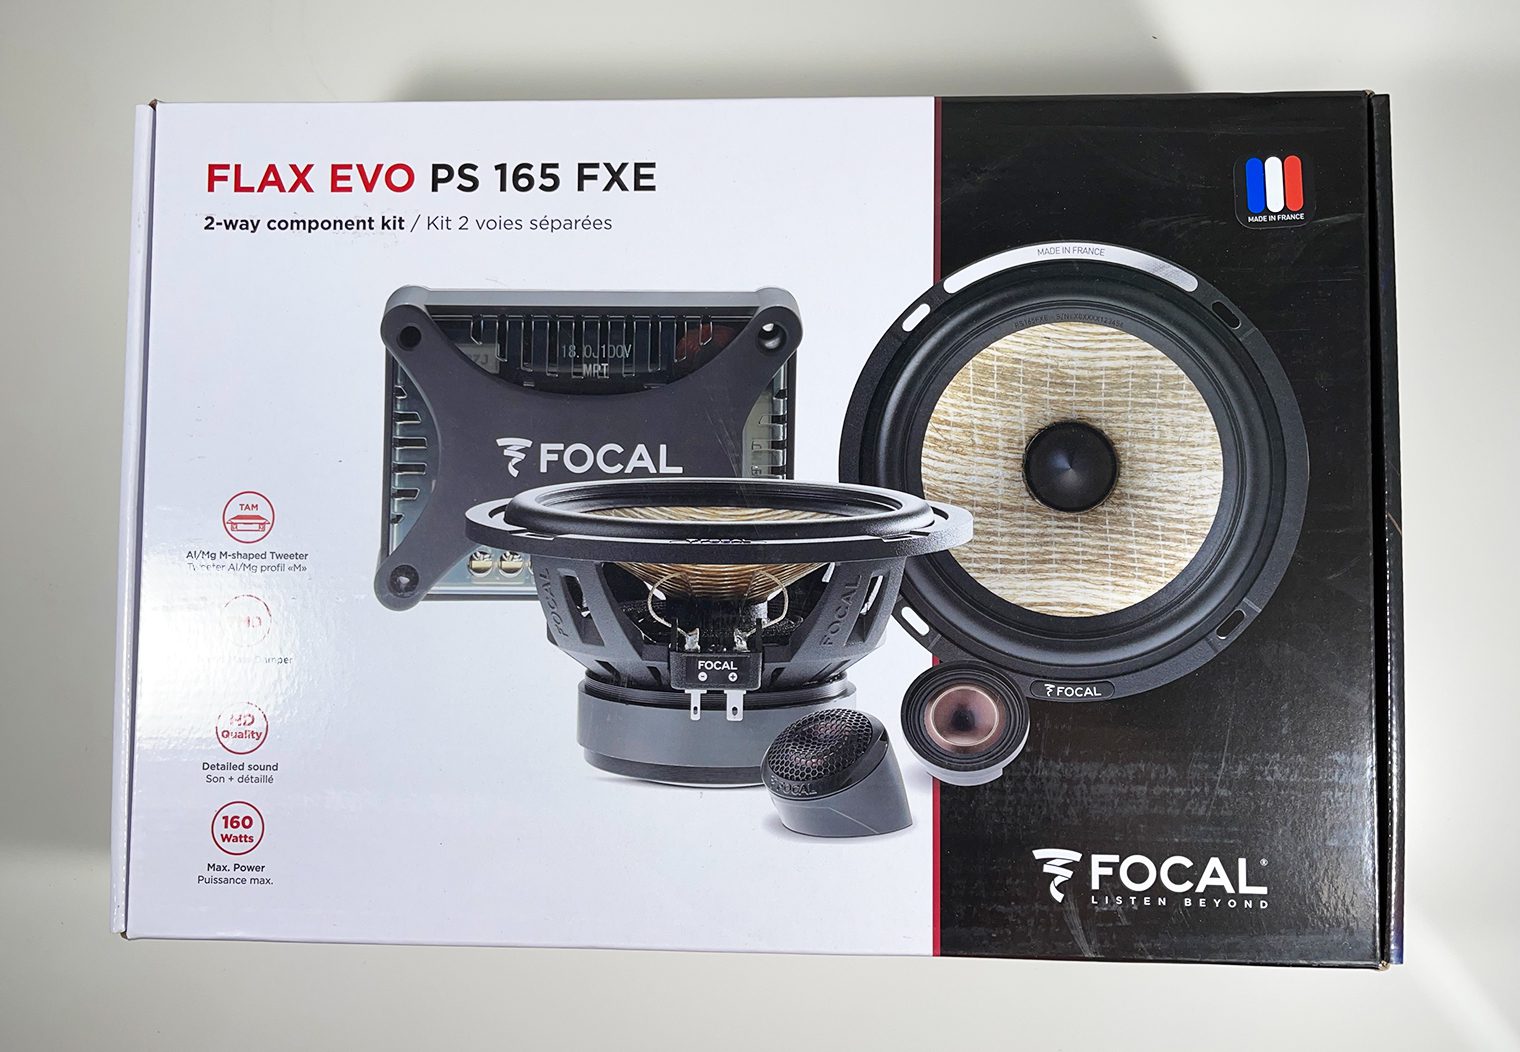 Focal PS 165 FXE component speakers in box for review